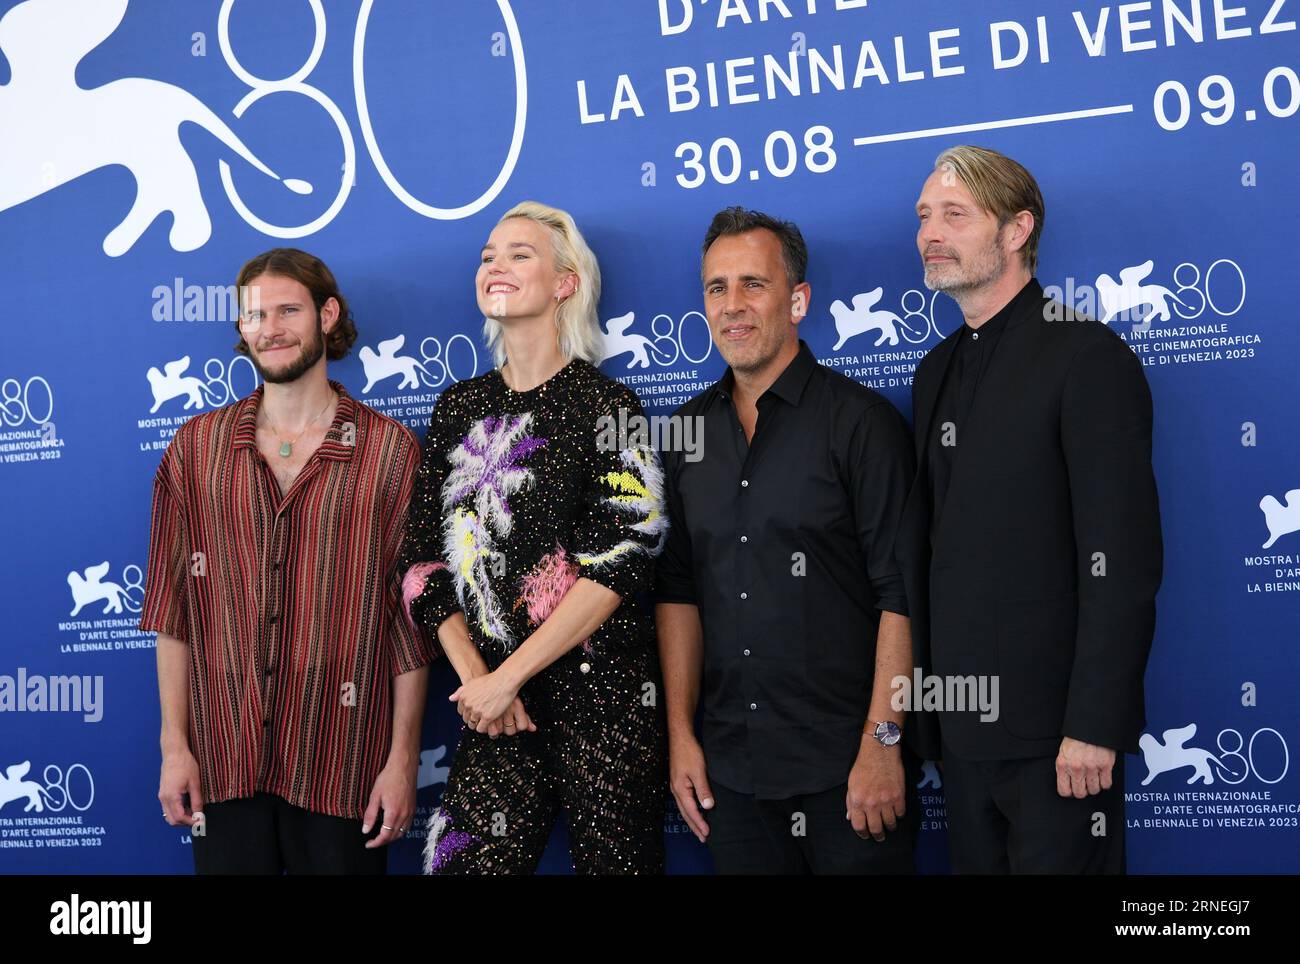 Venice, Italy. 1st Sep, 2023. Director Nikolaj Arcel (2nd, R), actor Simon Bennebjerg (1st, L), actress Amanda Collin (2nd, L) and actor Mads Mikkelsen attend a photocall for the film 'Bastarden (The Promised Land)' during the 80th Venice International Film Festival in Venice, Italy, Sept. 1, 2023. The film will compete for the prestigious Golden Lion prize. Credit: Jin Mamengni/Xinhua/Alamy Live News Stock Photo